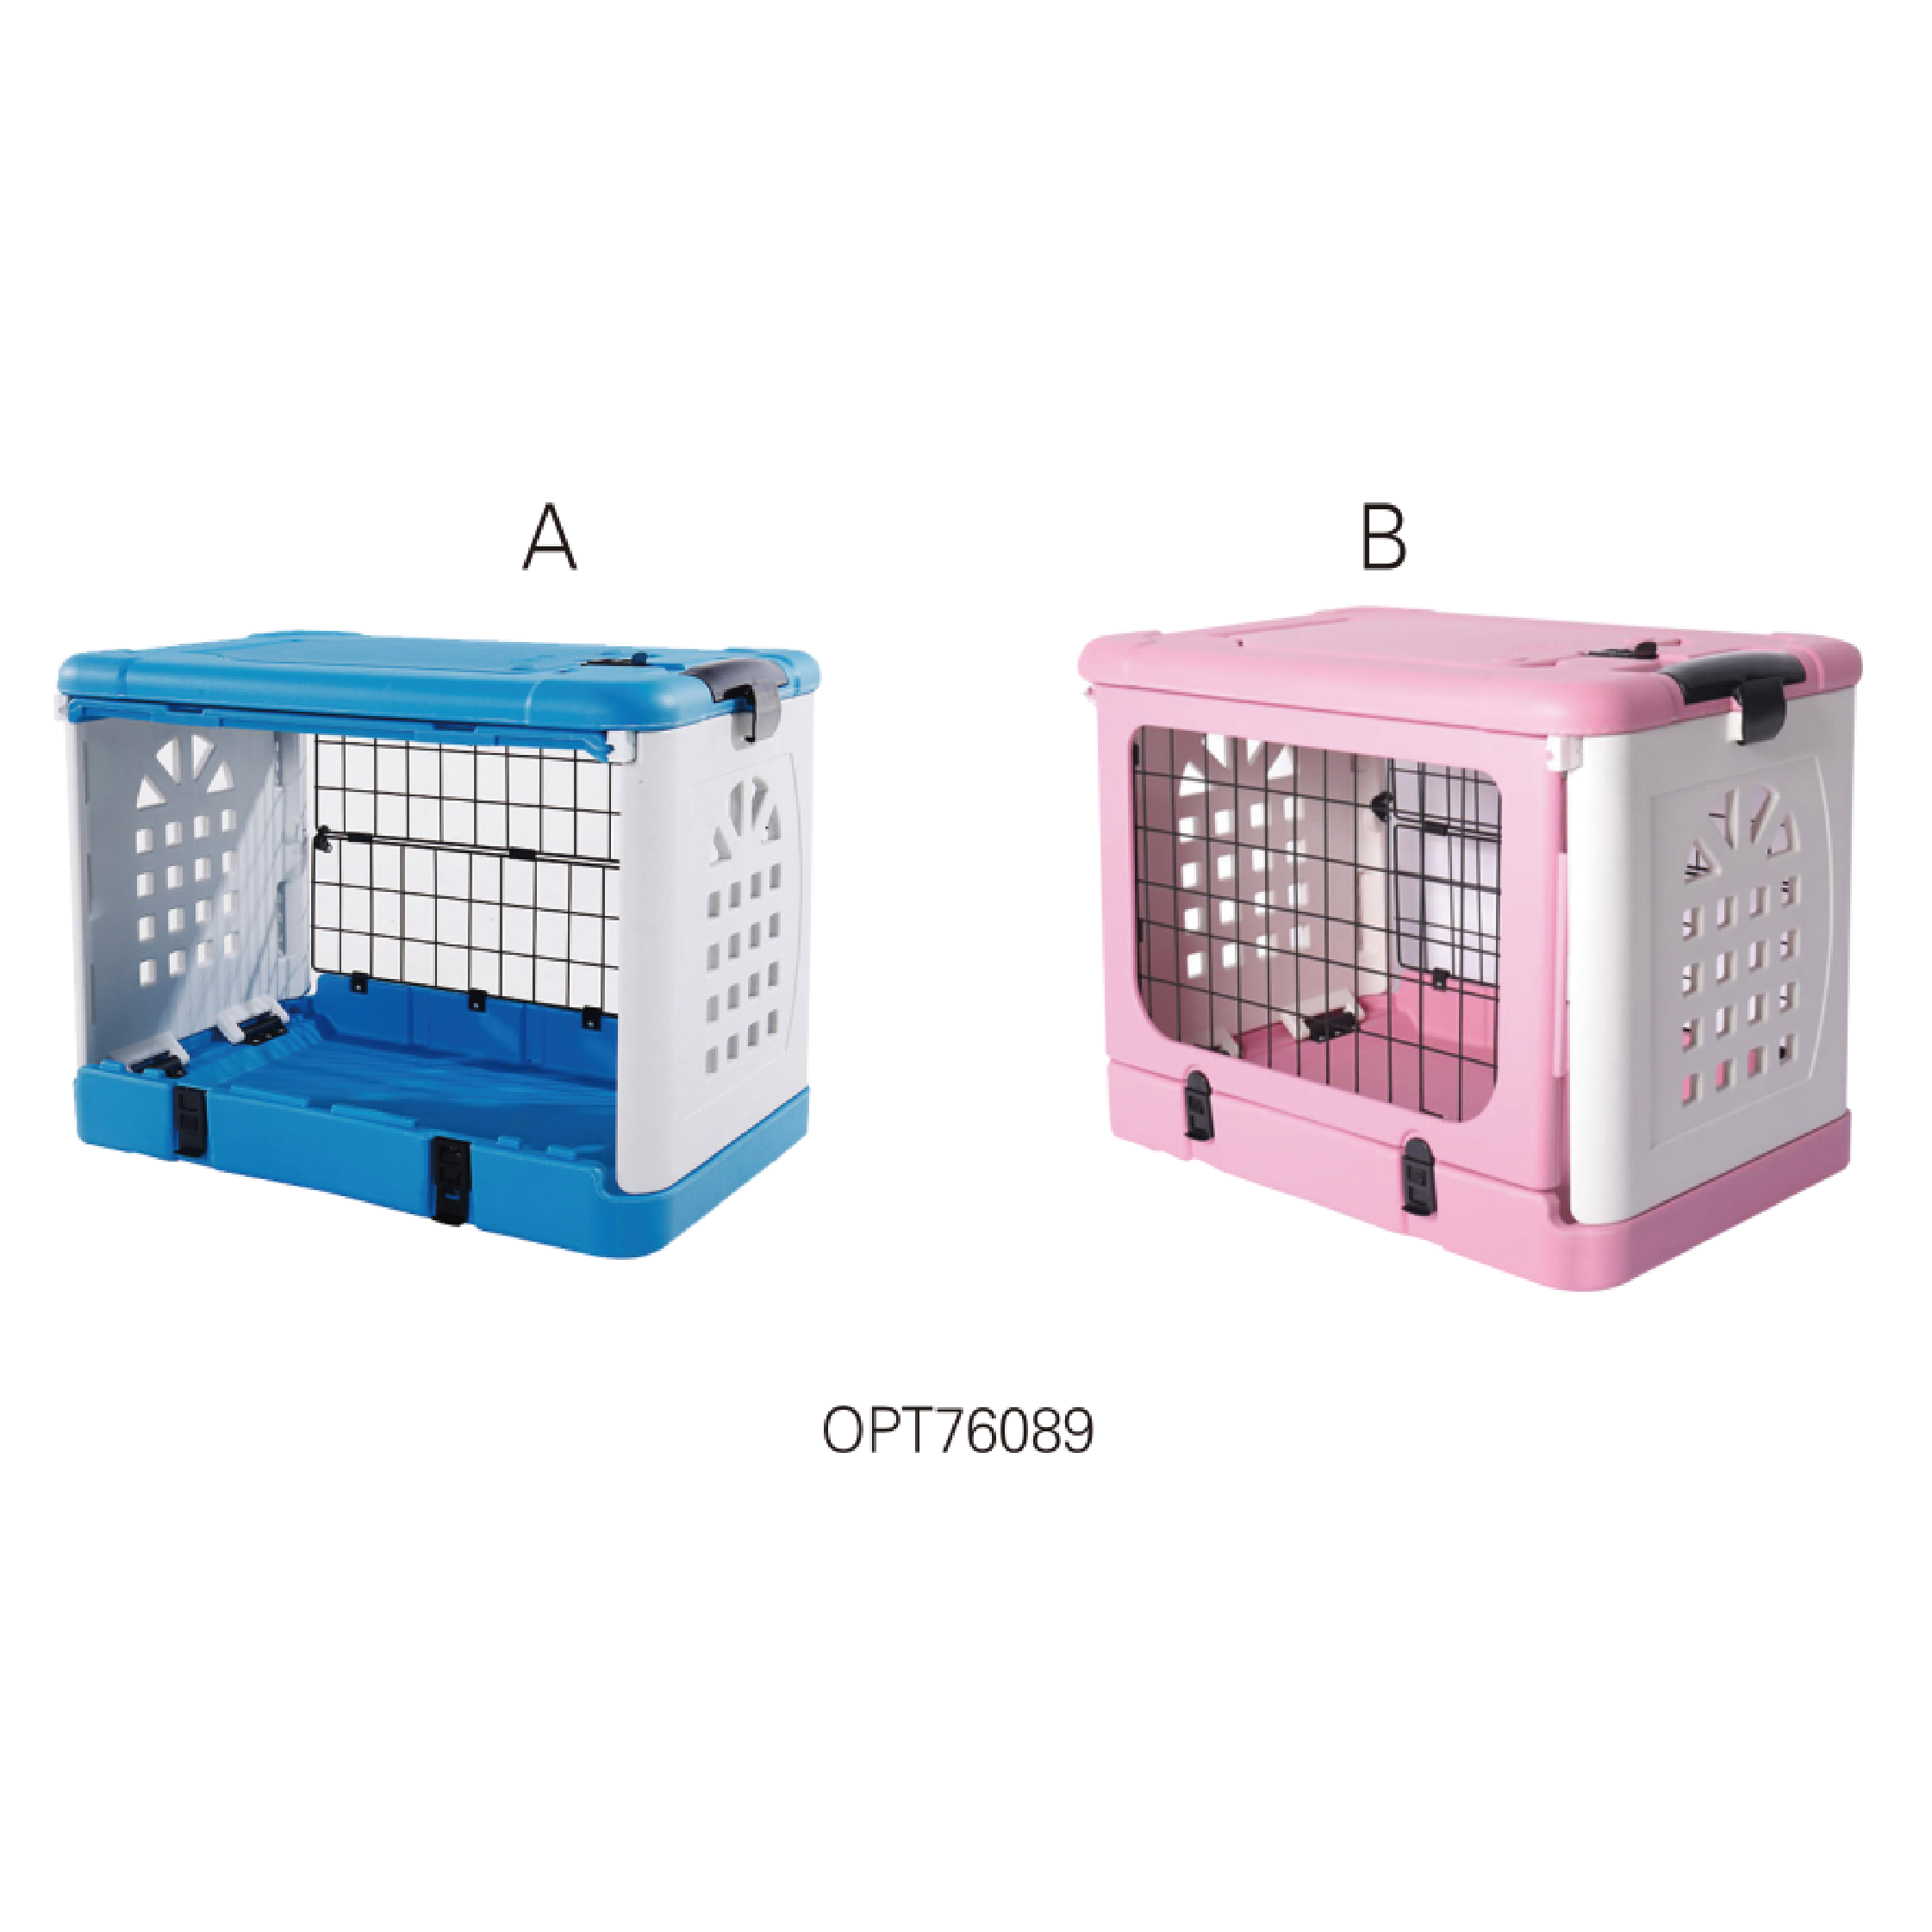 OPT76089 Pet cage